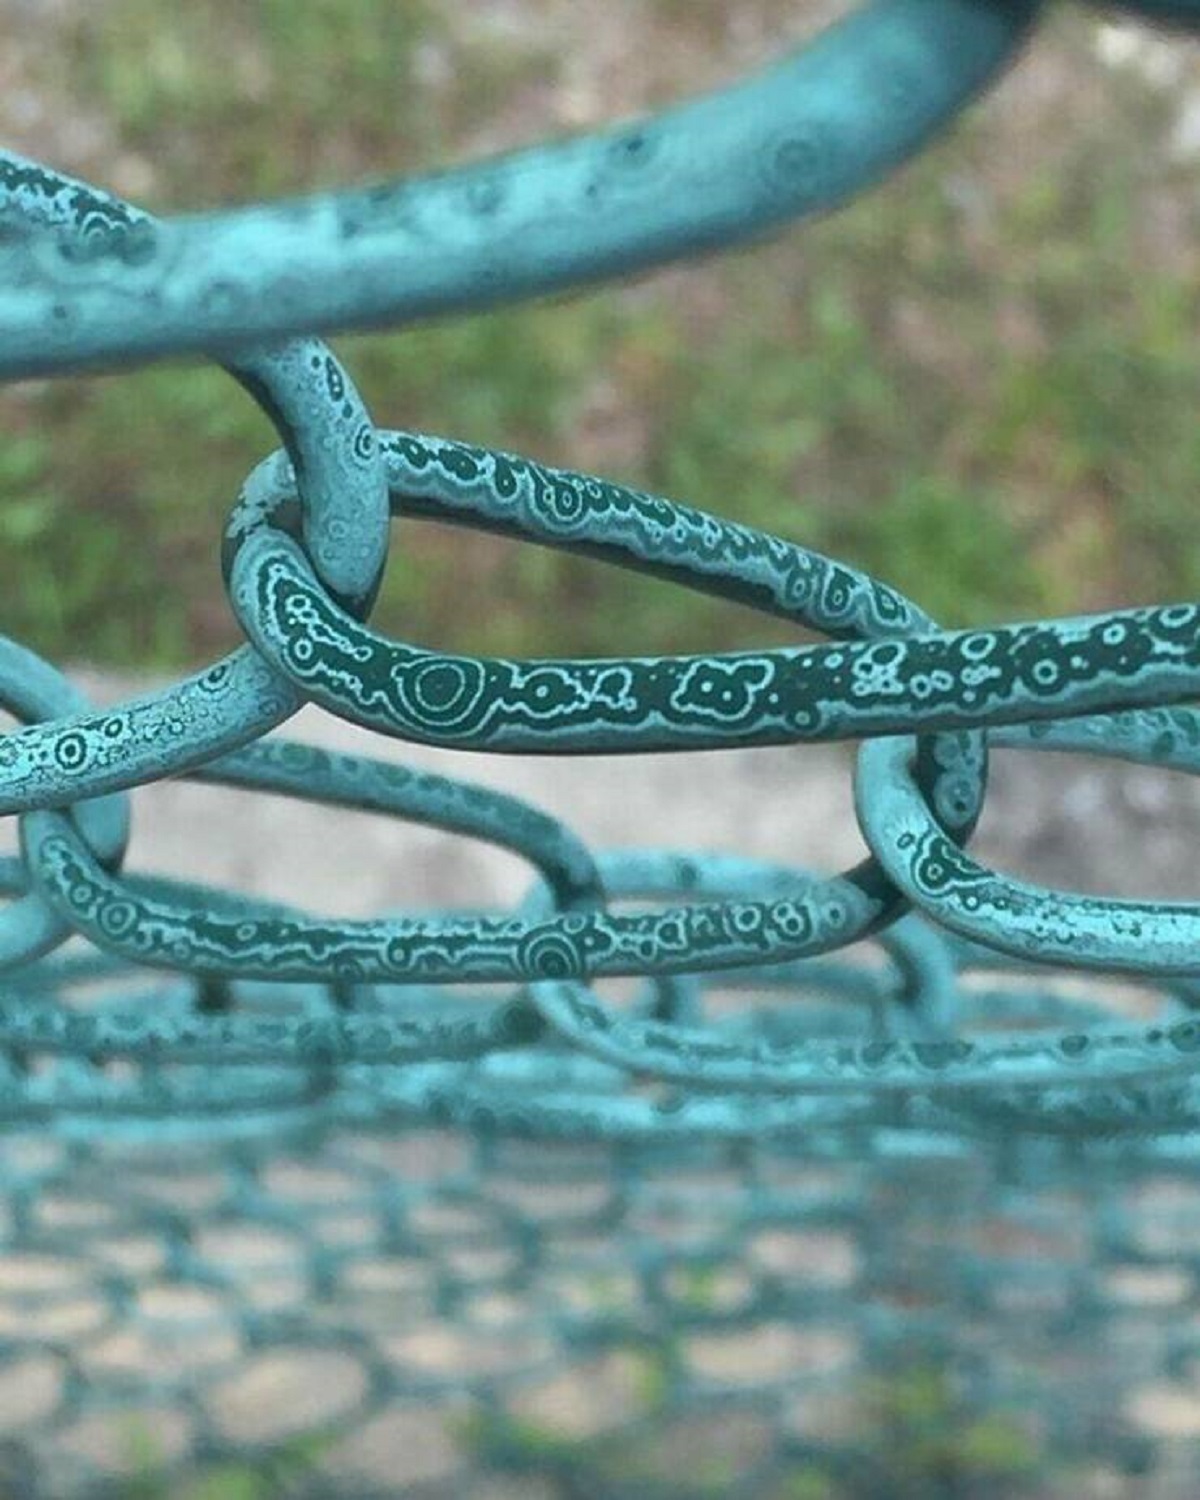 "The Paint On This Chain-Link Fence Faded Into A Pattern Of Circles"